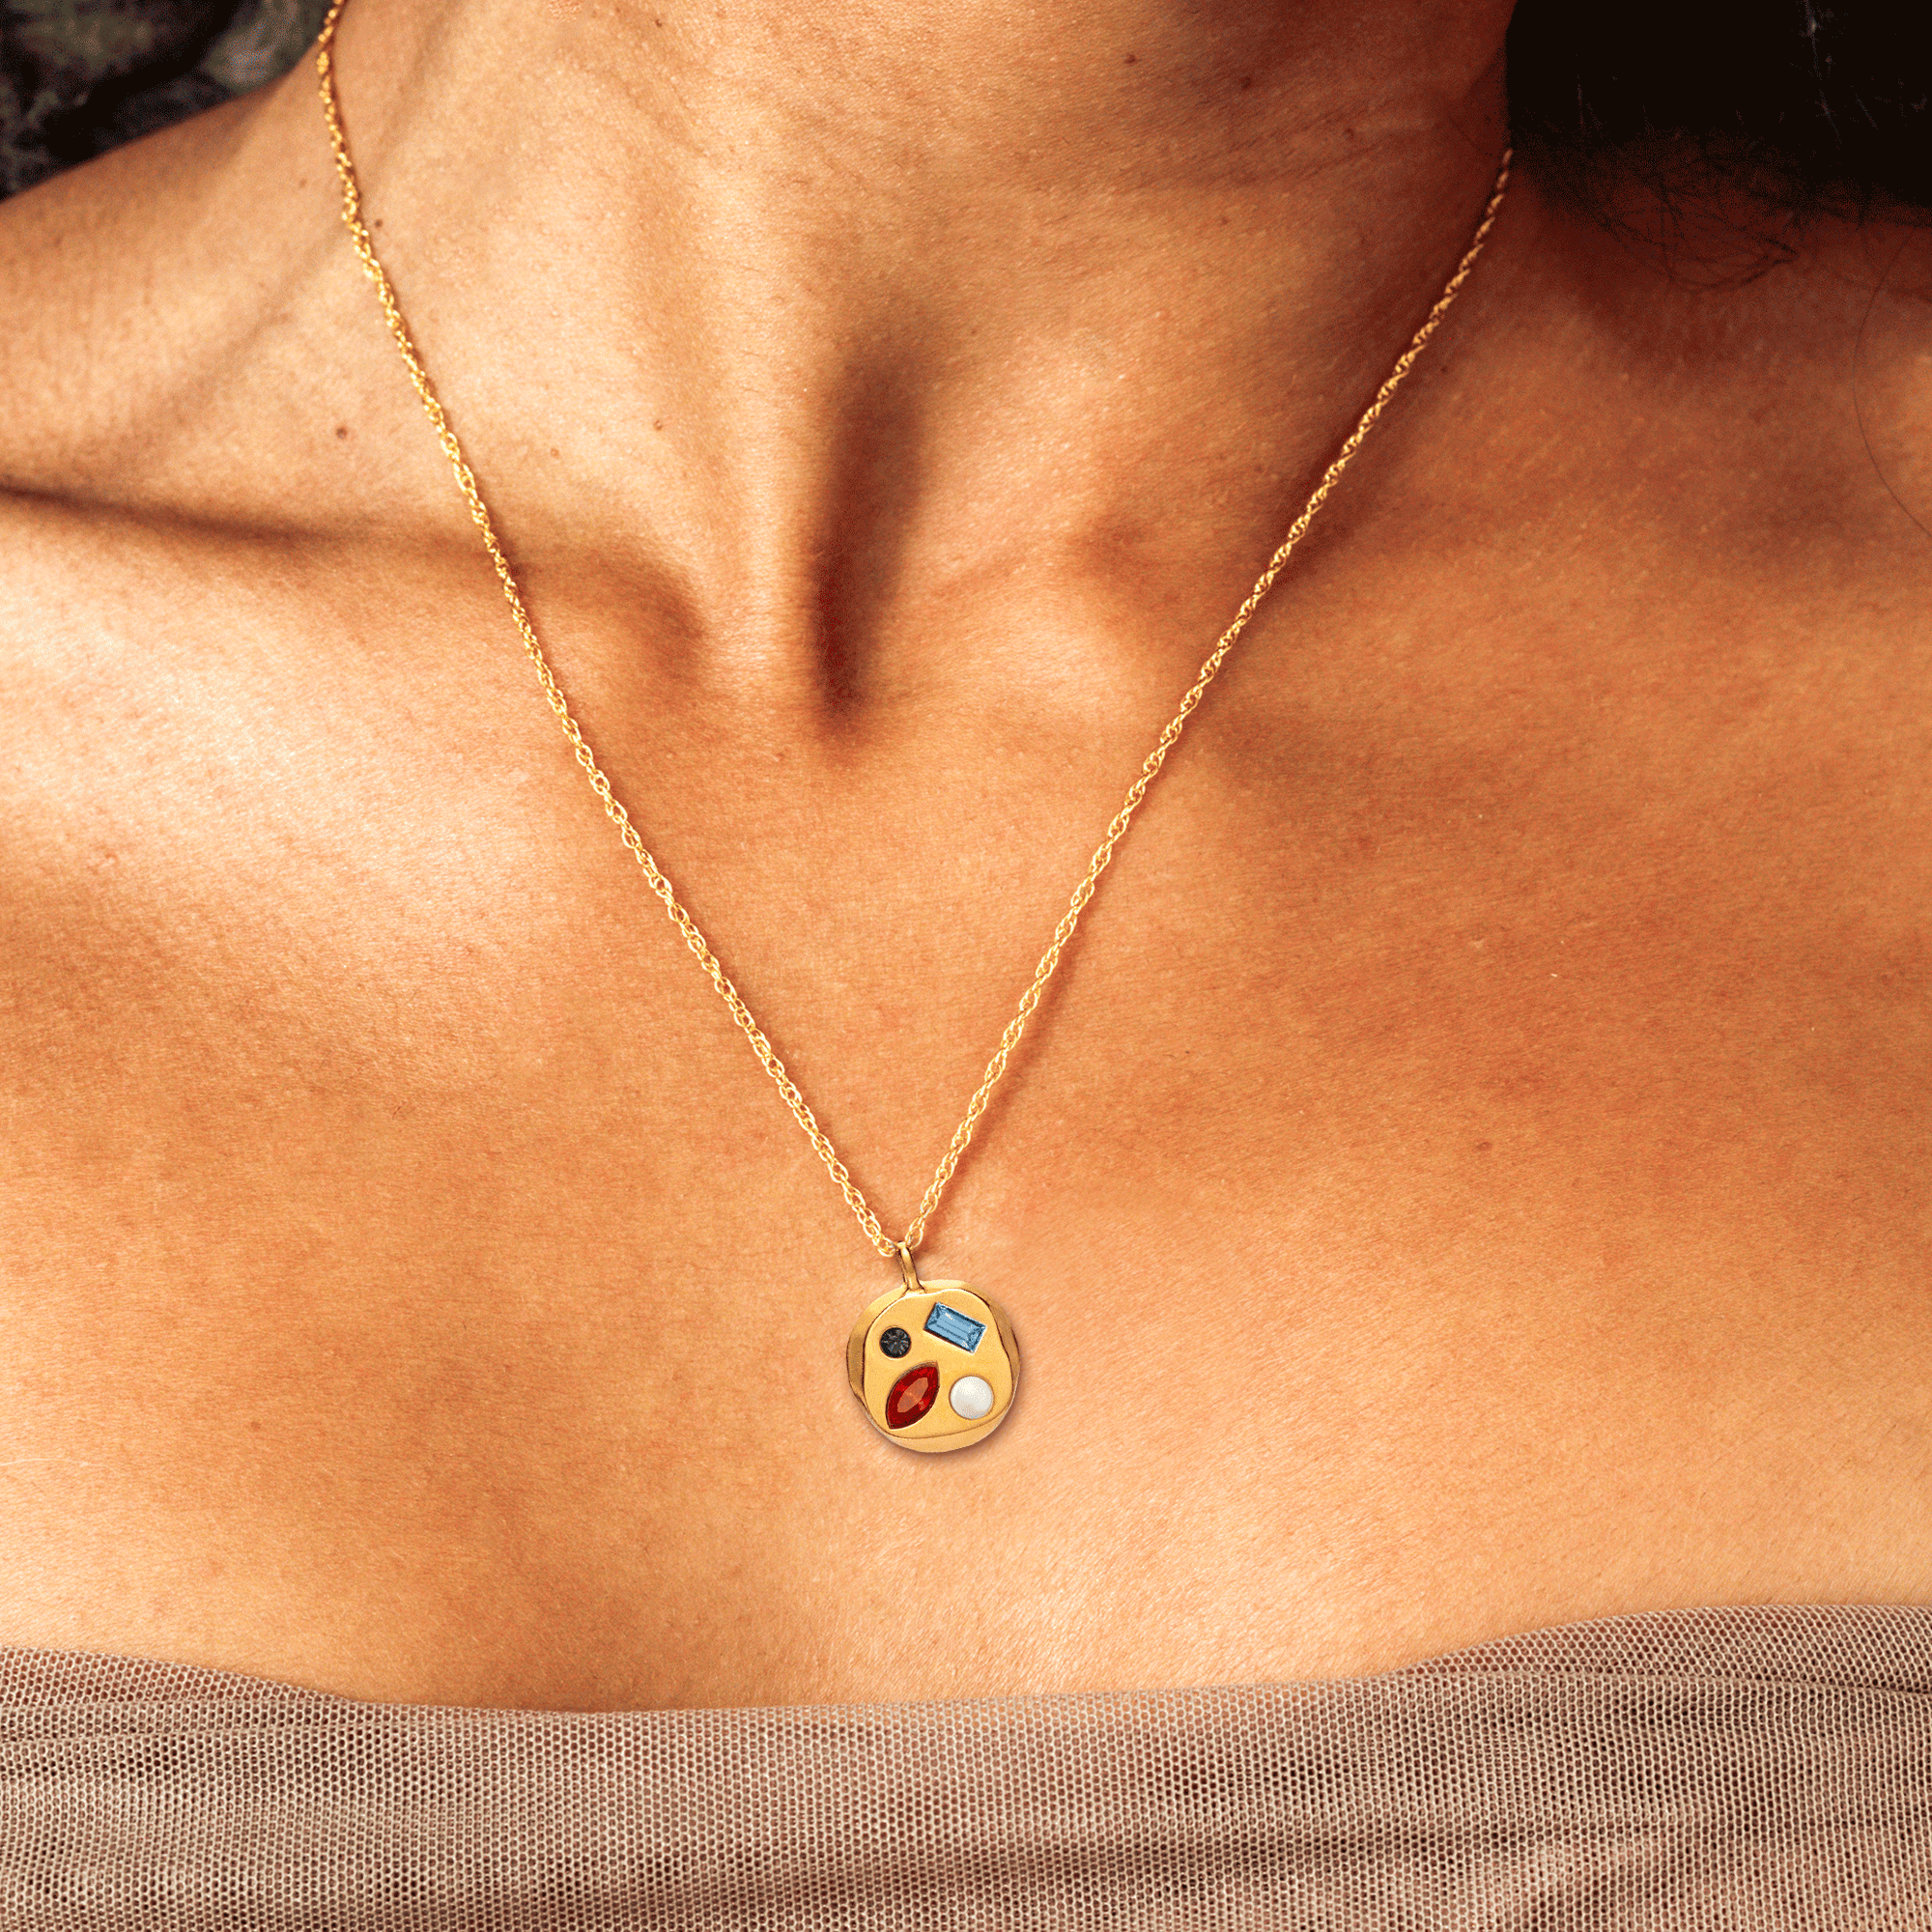 Person wearing The July Thirtieth Pendant